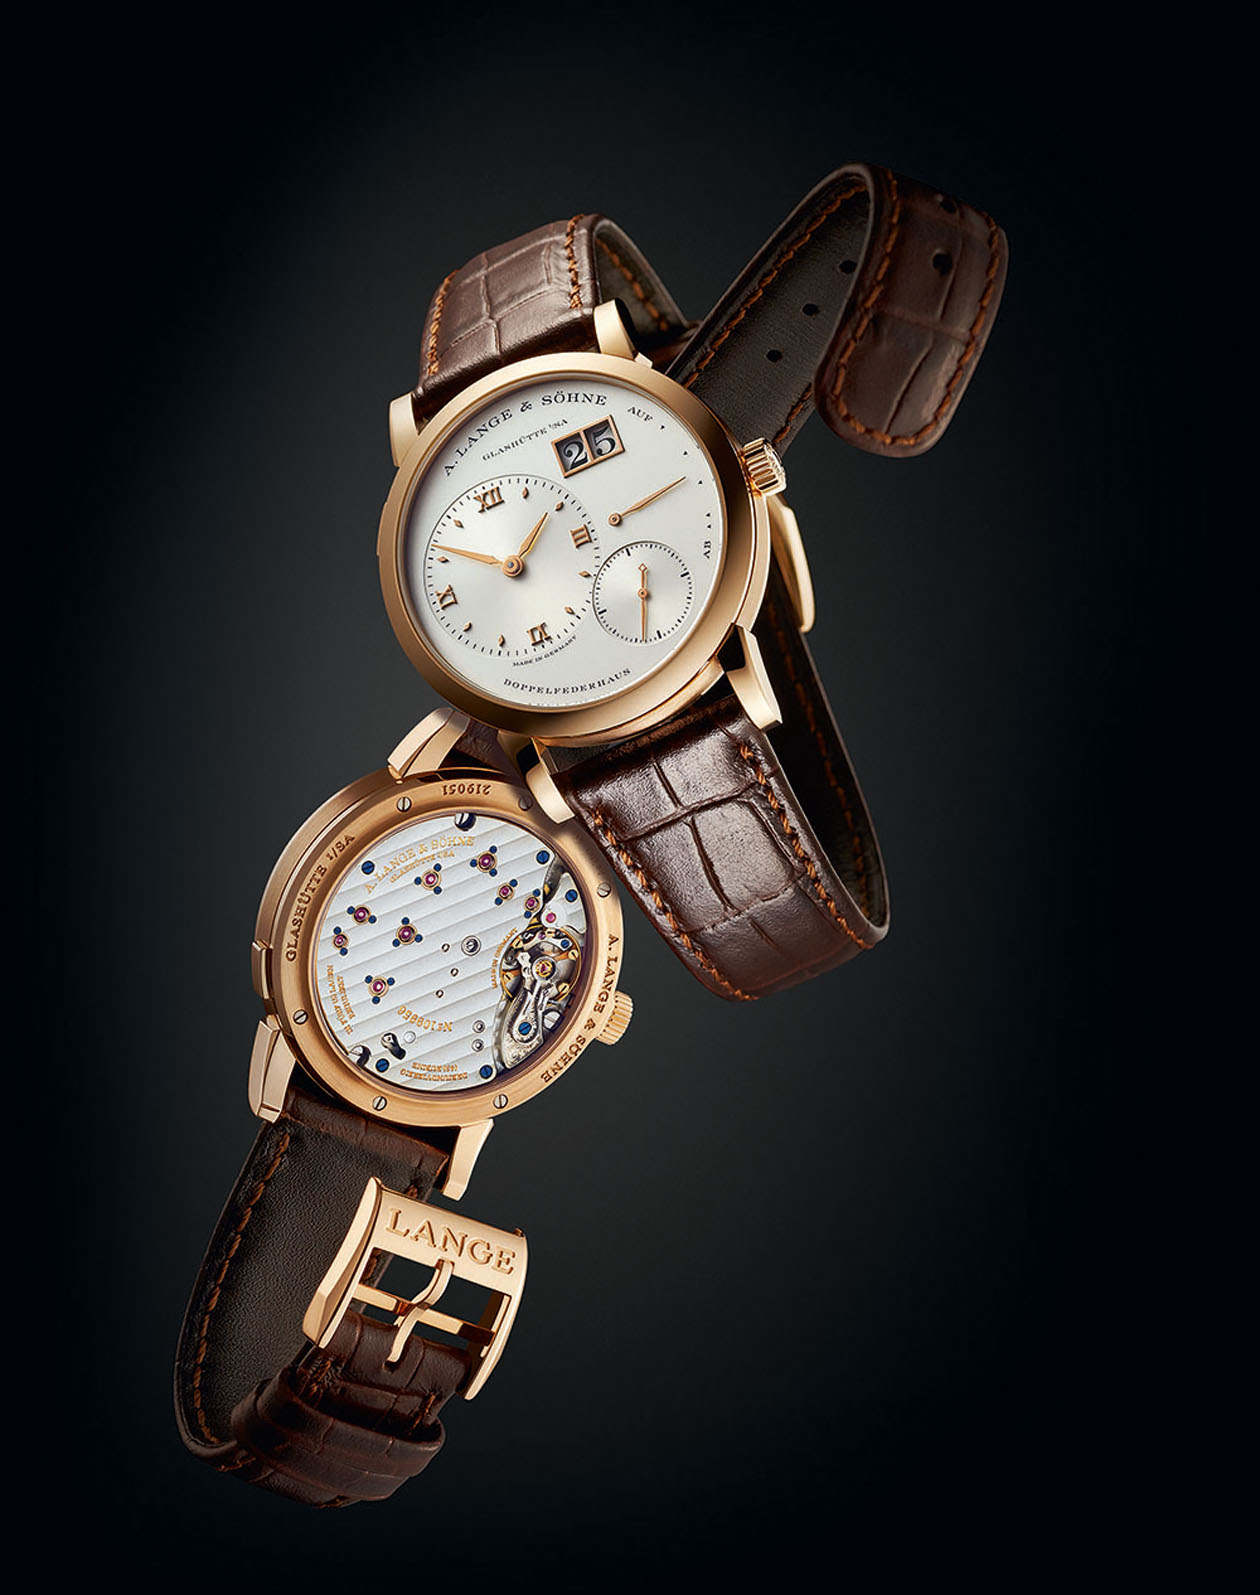 REFERENCE: 191.032 MOVEMENT: In-house Caliber L121.1, hand-wound, big date, power-reserve indicator, diameter = 30.6 mm, height = 5.7 mm, 21,600 vph, 43 jewels, 72-hour power reserve CASE: Rose gold, diameter = 38.5 mm, height = 9.8 mm, curved sapphire crystal with non-reflective coating on both sides, sapphire caseback secured with six screws, water-resistant to 30 meters STRAP AND CLASP: Alligator strap with rose-gold buckle VARIATIONS: Yellow gold; platinum